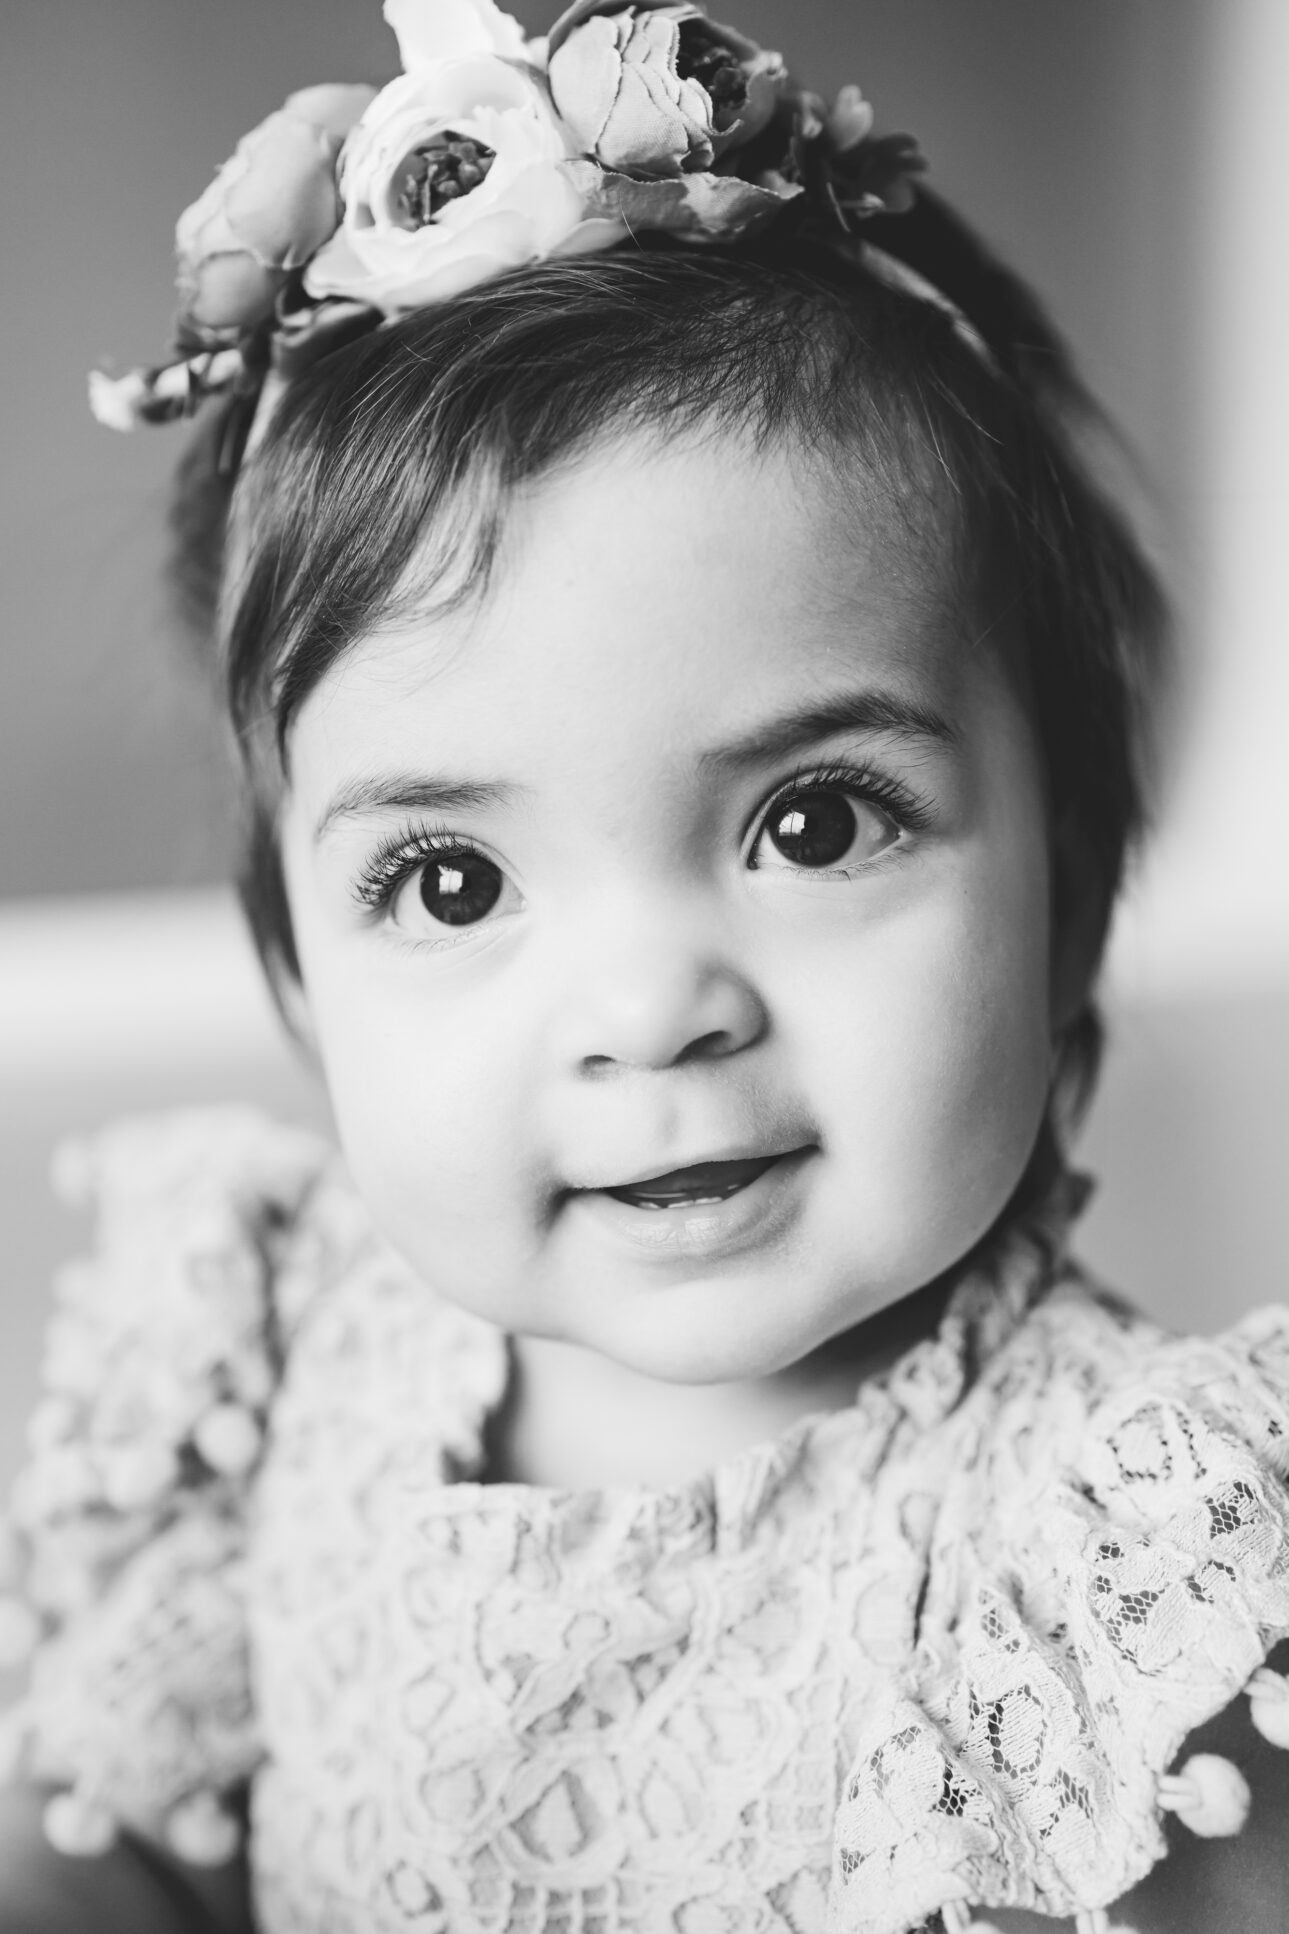 Front-Room-Studios-family-photographer-baby-kid-child-black-and-white